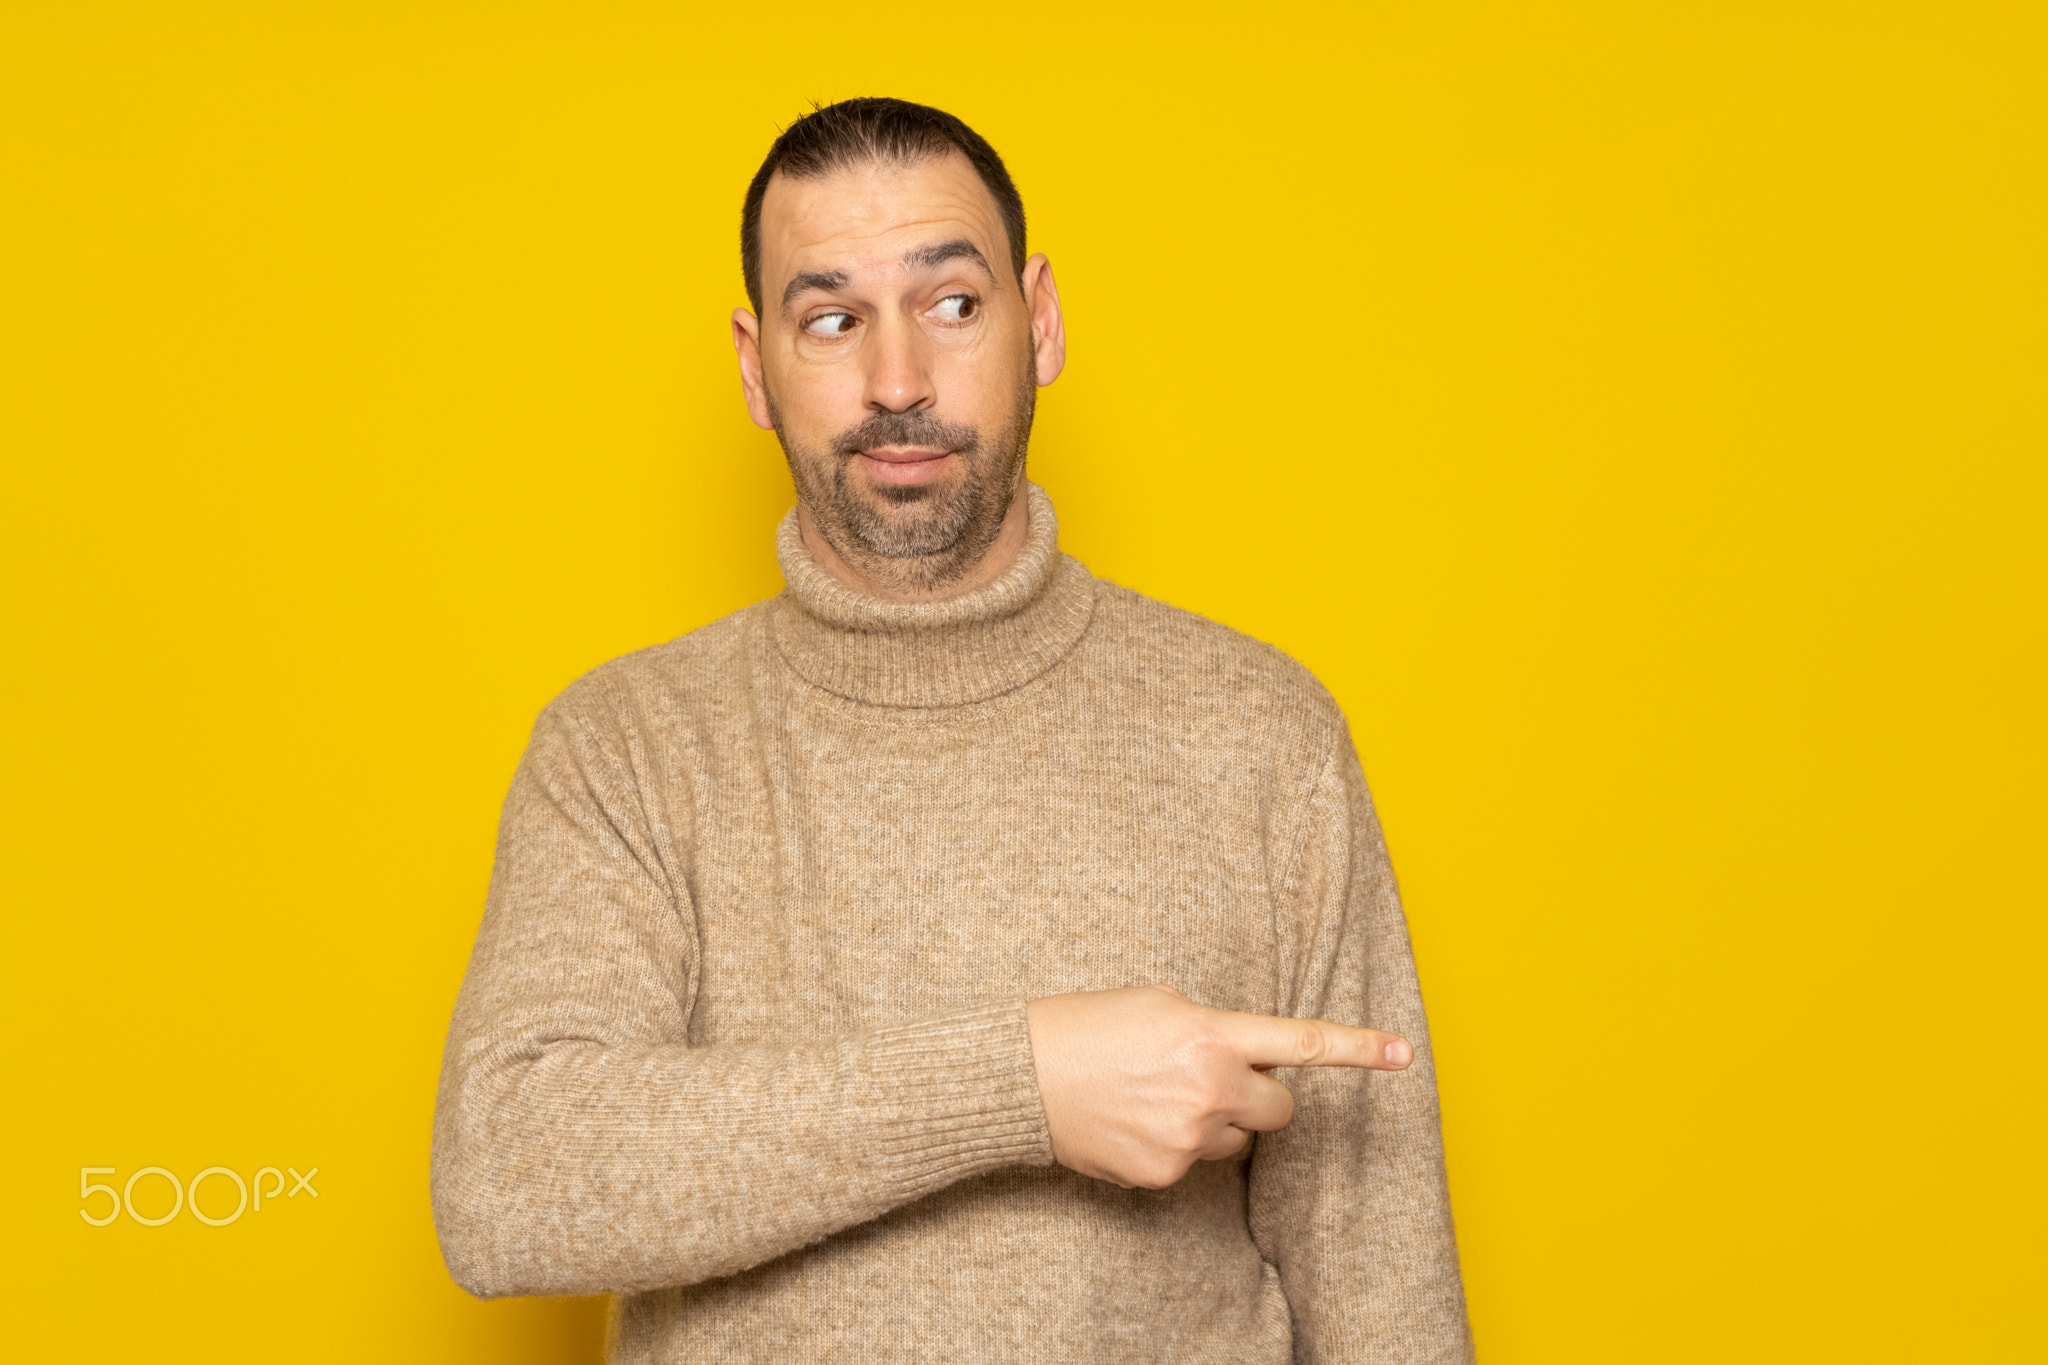 Hispanic man with a beard in a beige turtleneck pointing to the side